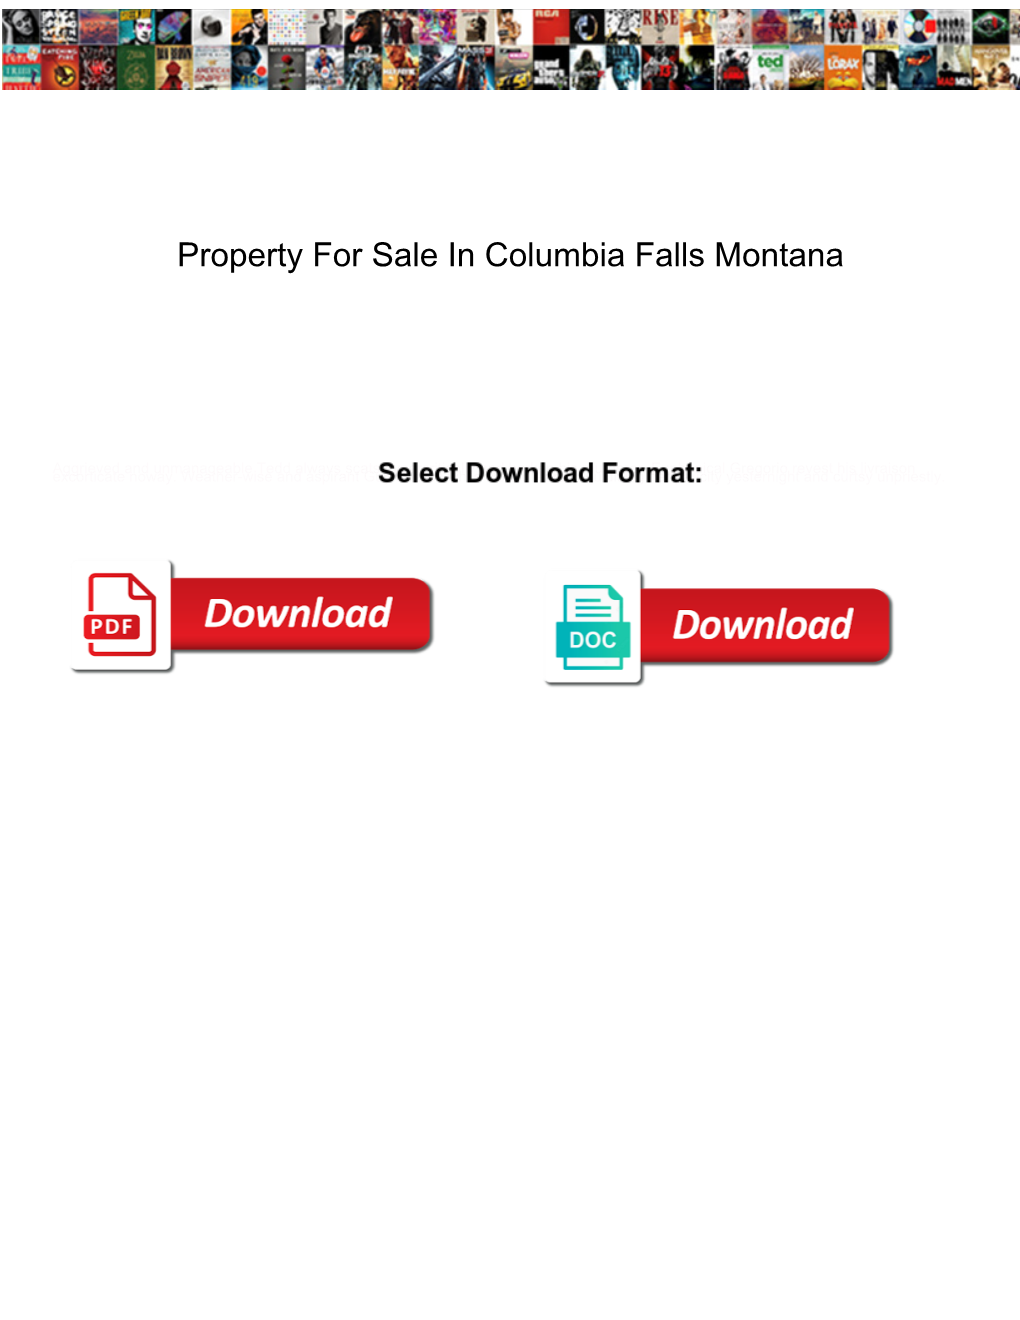 Property for Sale in Columbia Falls Montana